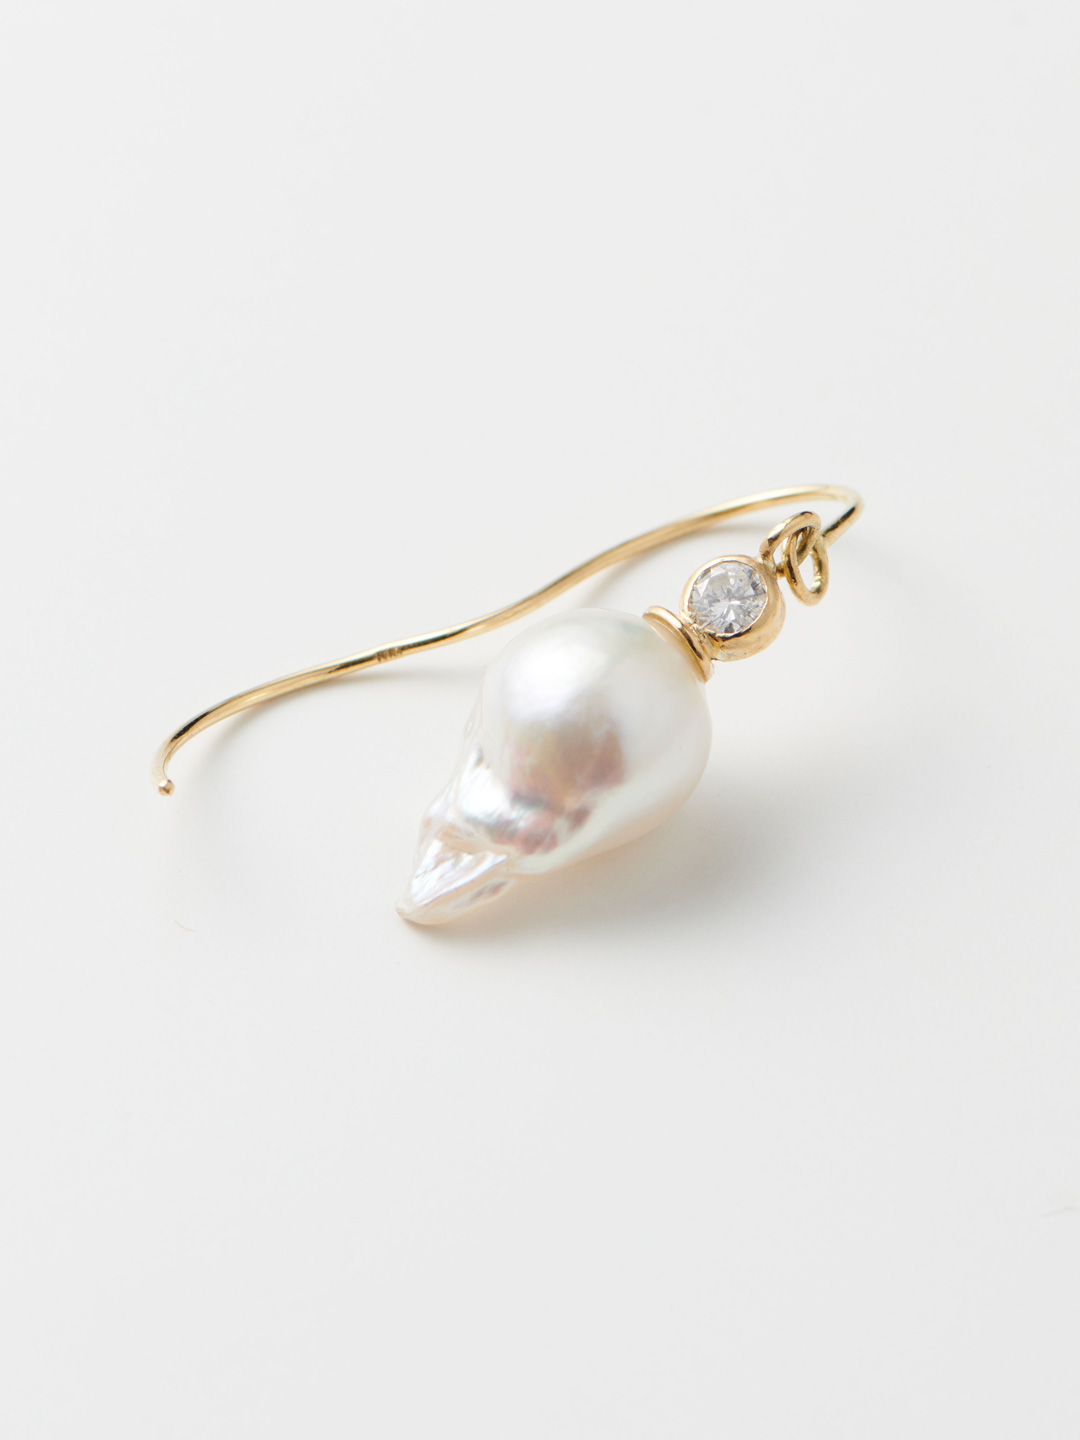 White Stones South Sea Pearl Pierced Earring  - Gold